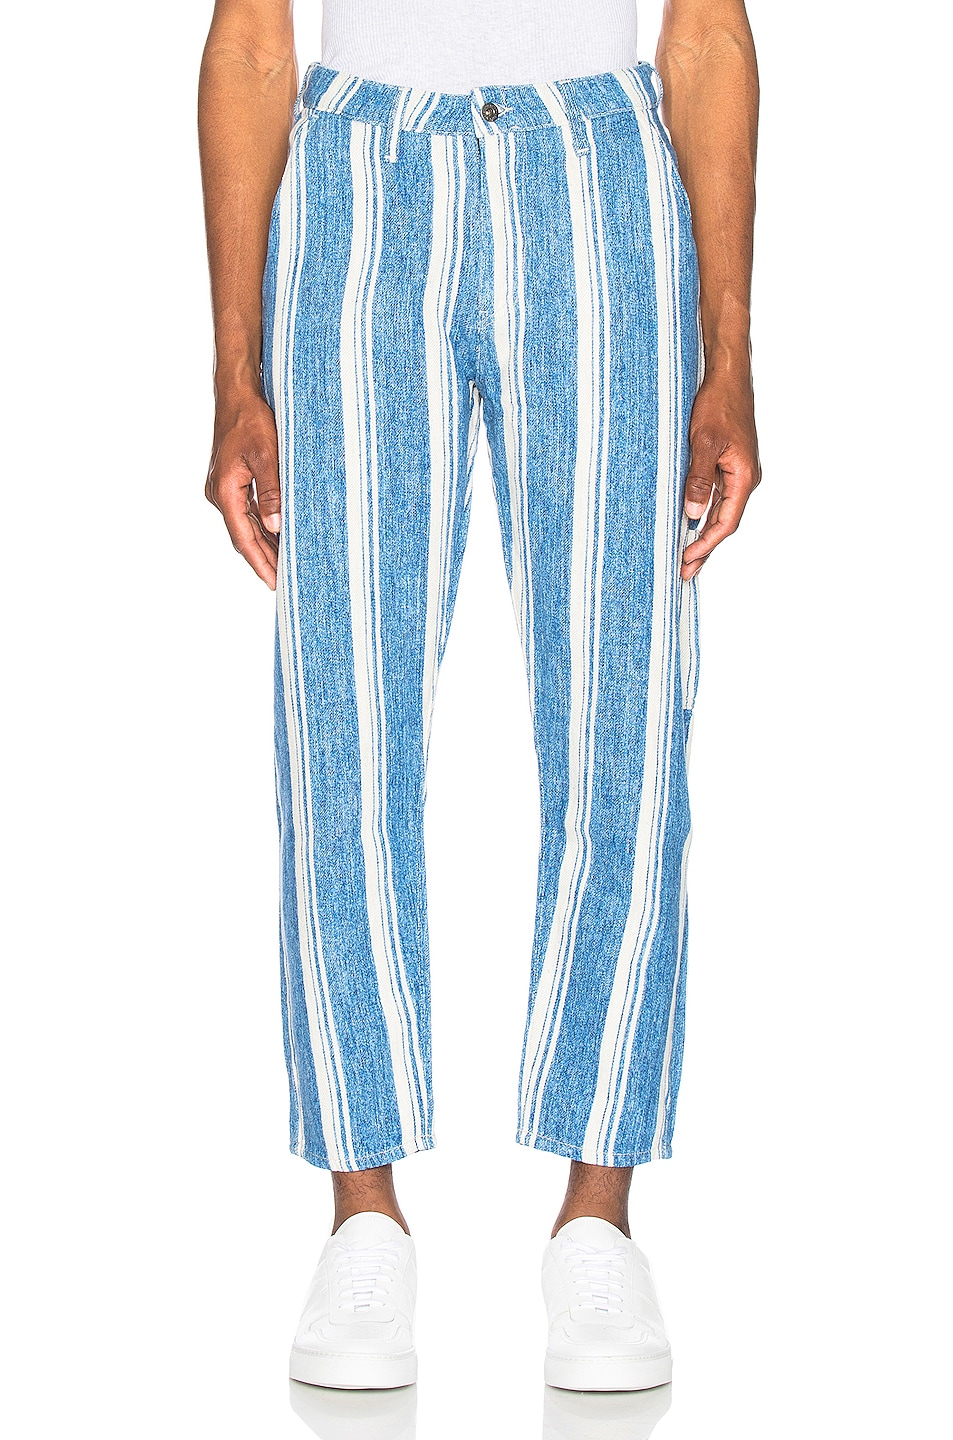 Image 1 of LEVI'S: Made & Crafted Draft Crop Carpenter Pant in Linen Stripe